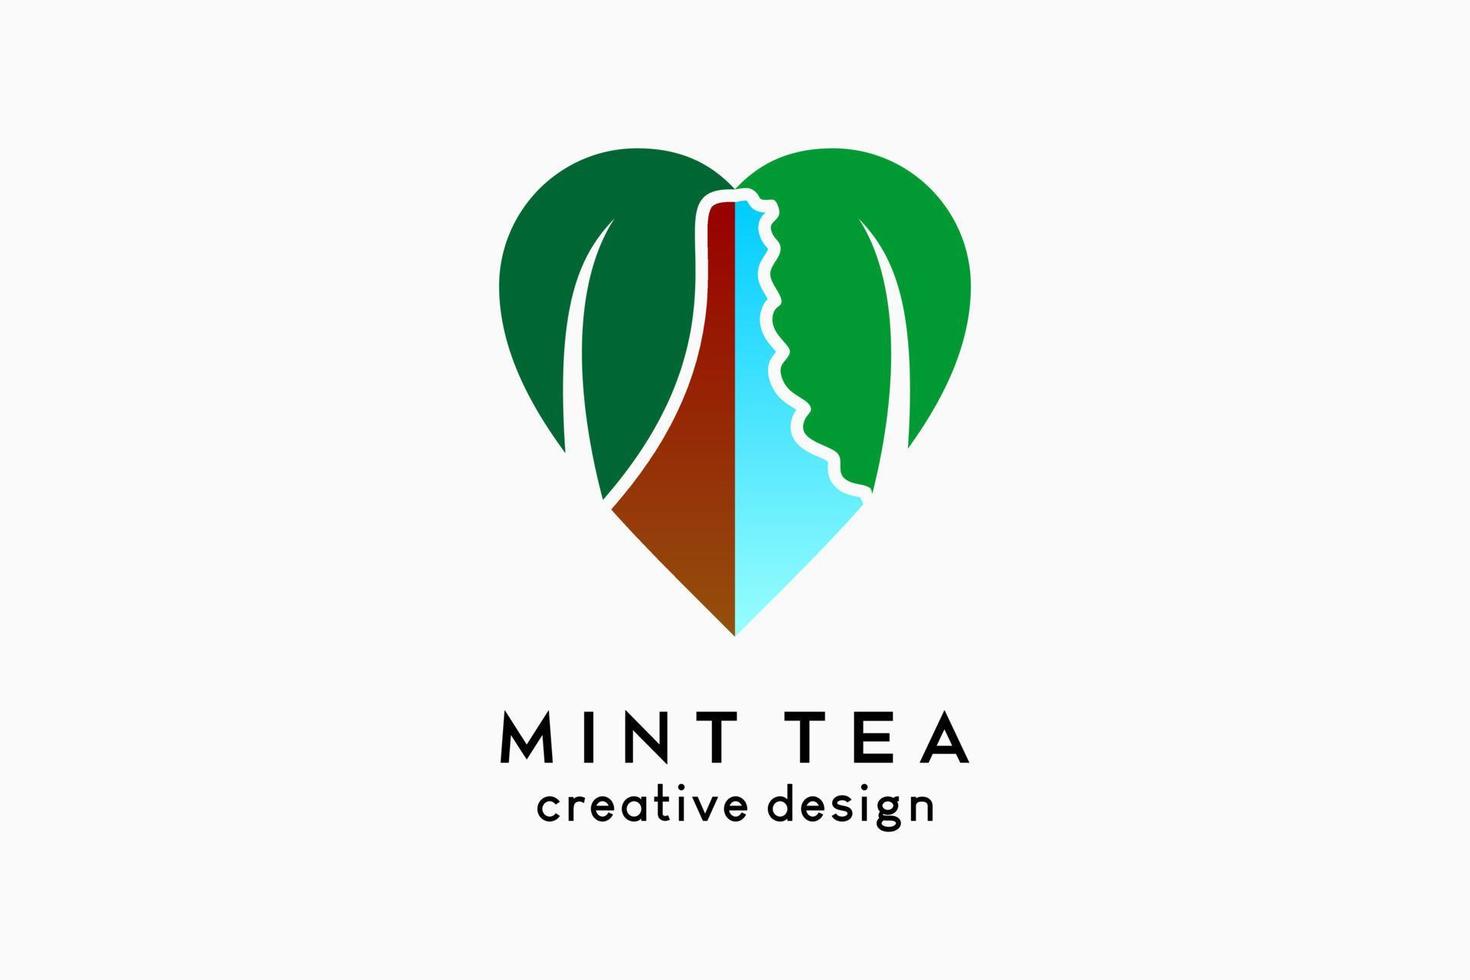 Mint tea logo design, tea leaf icon and mint leaf icon in the heart. Vector logo illustration for beverage or herbal business.